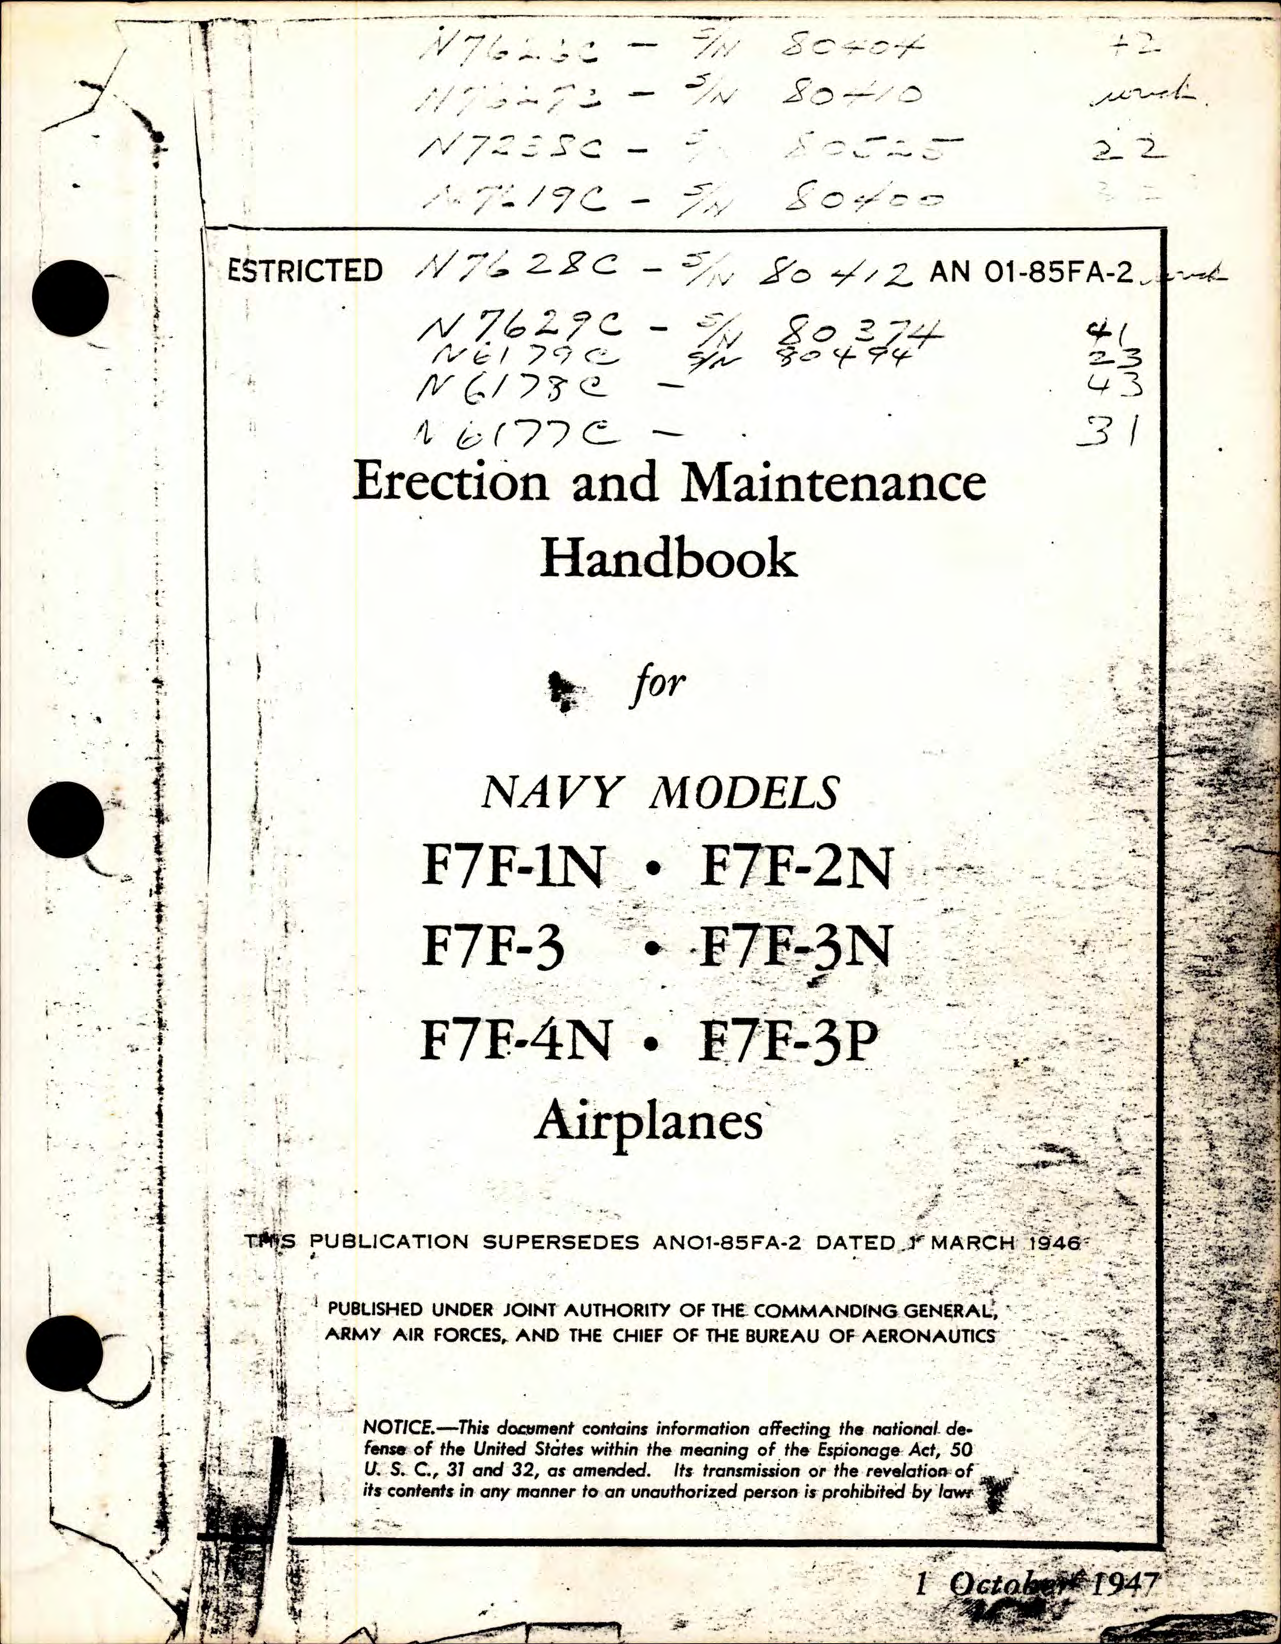 Sample page 1 from AirCorps Library document: Erection and Maintenance for F7F-1N, F7F-2N, F7F-3, F7F-3N, F7F-4N, and F7F-3P